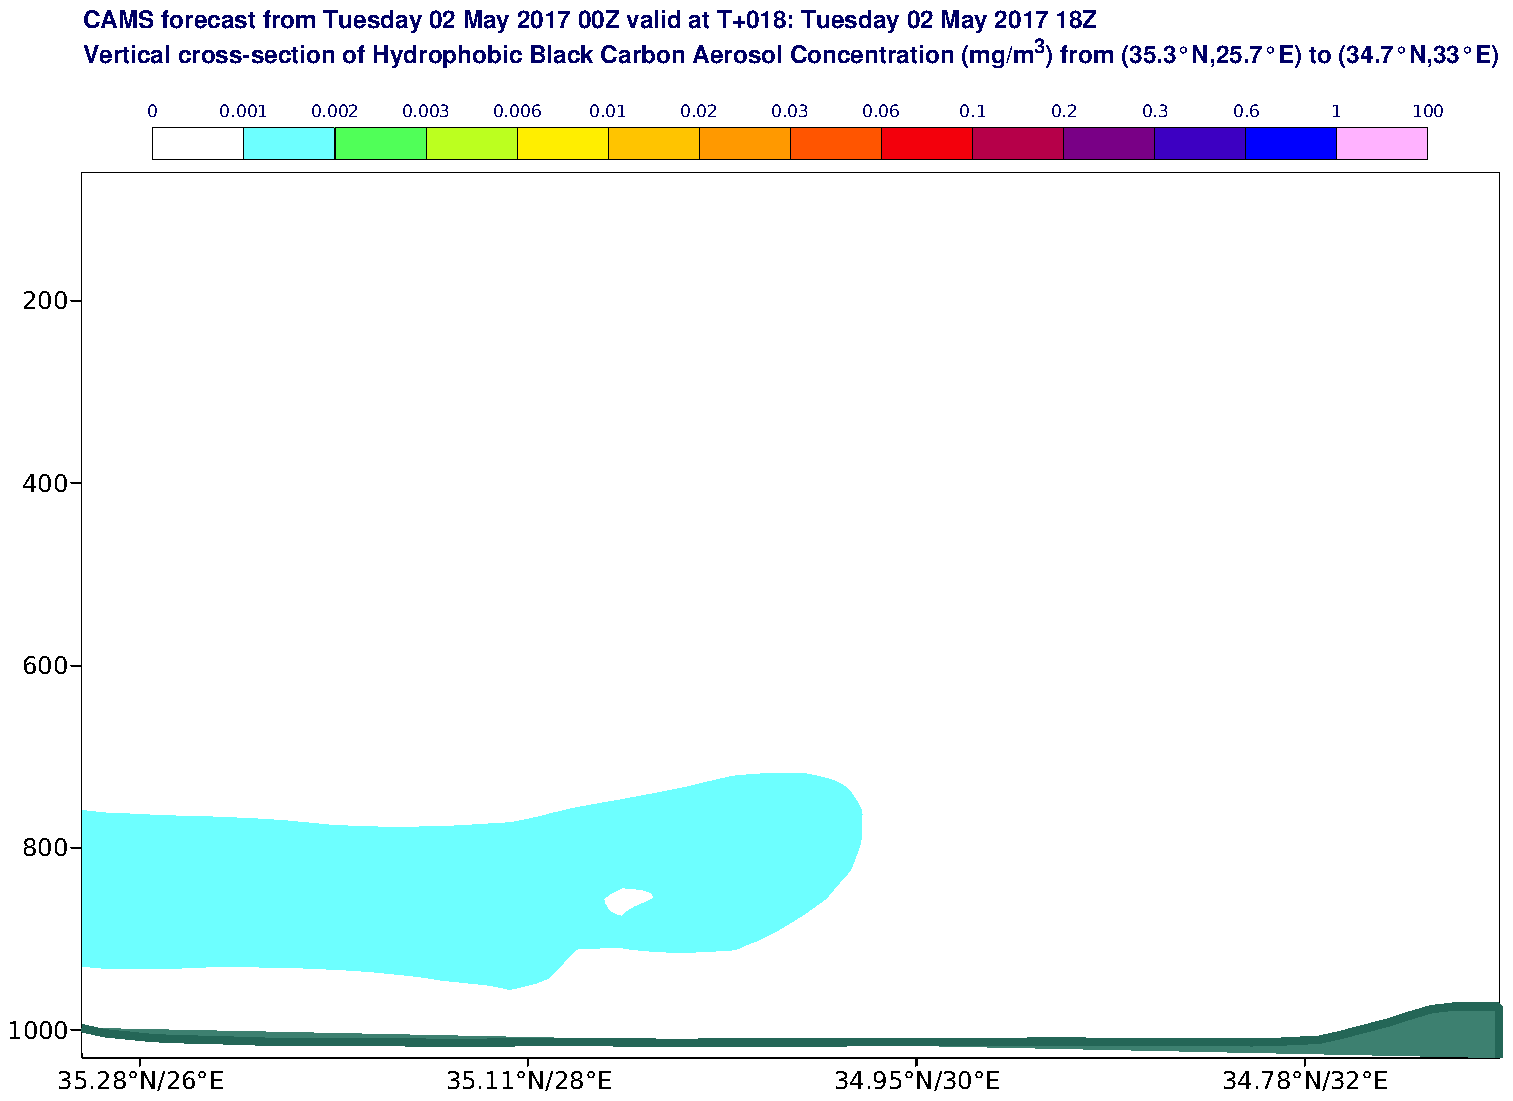 Vertical cross-section of Hydrophobic Black Carbon Aerosol Concentration (mg/m3) valid at T18 - 2017-05-02 18:00